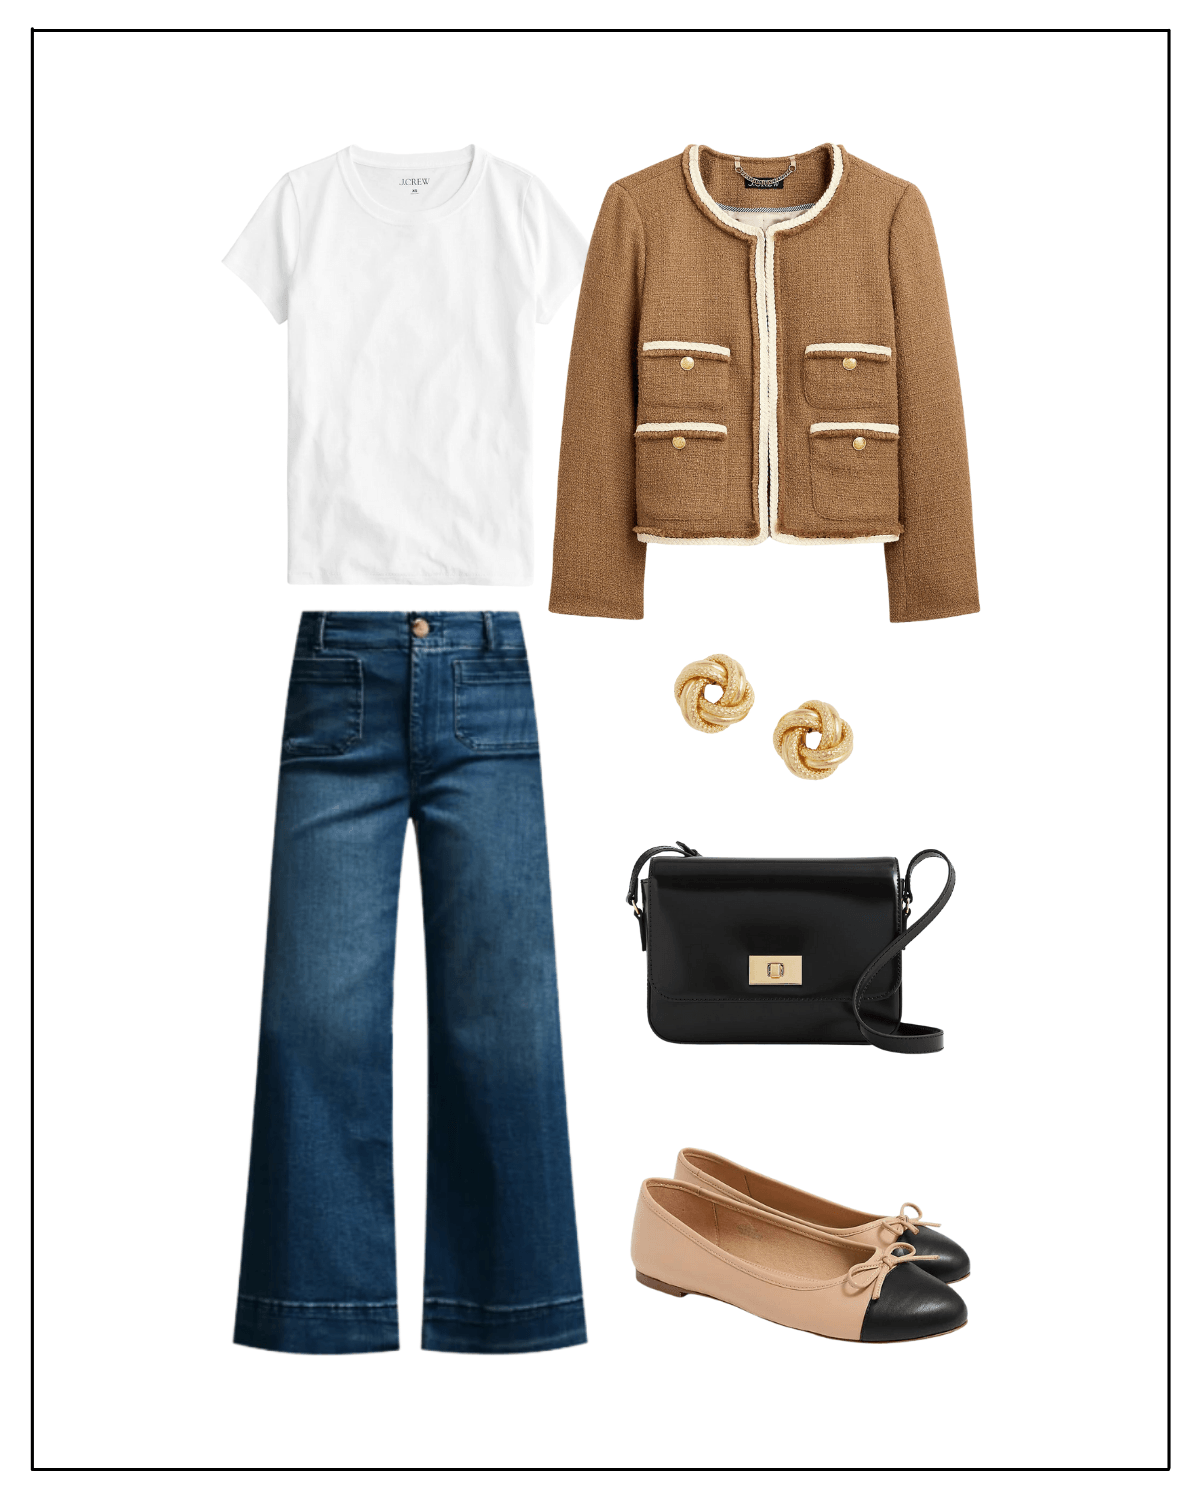 This is a wonderful transitional outfit idea and one you can wear from work to weekend. It includes a tan tweed jacket with the most beautiful white trim and gold button details. I styled it with a basic white crewneck tee and wide-leg jeans. For shoes I went with an affordable pair of cap toe ballet flats that look so much like designer styles but are a fraction of the cost. And I tied this look together with gold knot earrings and a black crossbody bag.